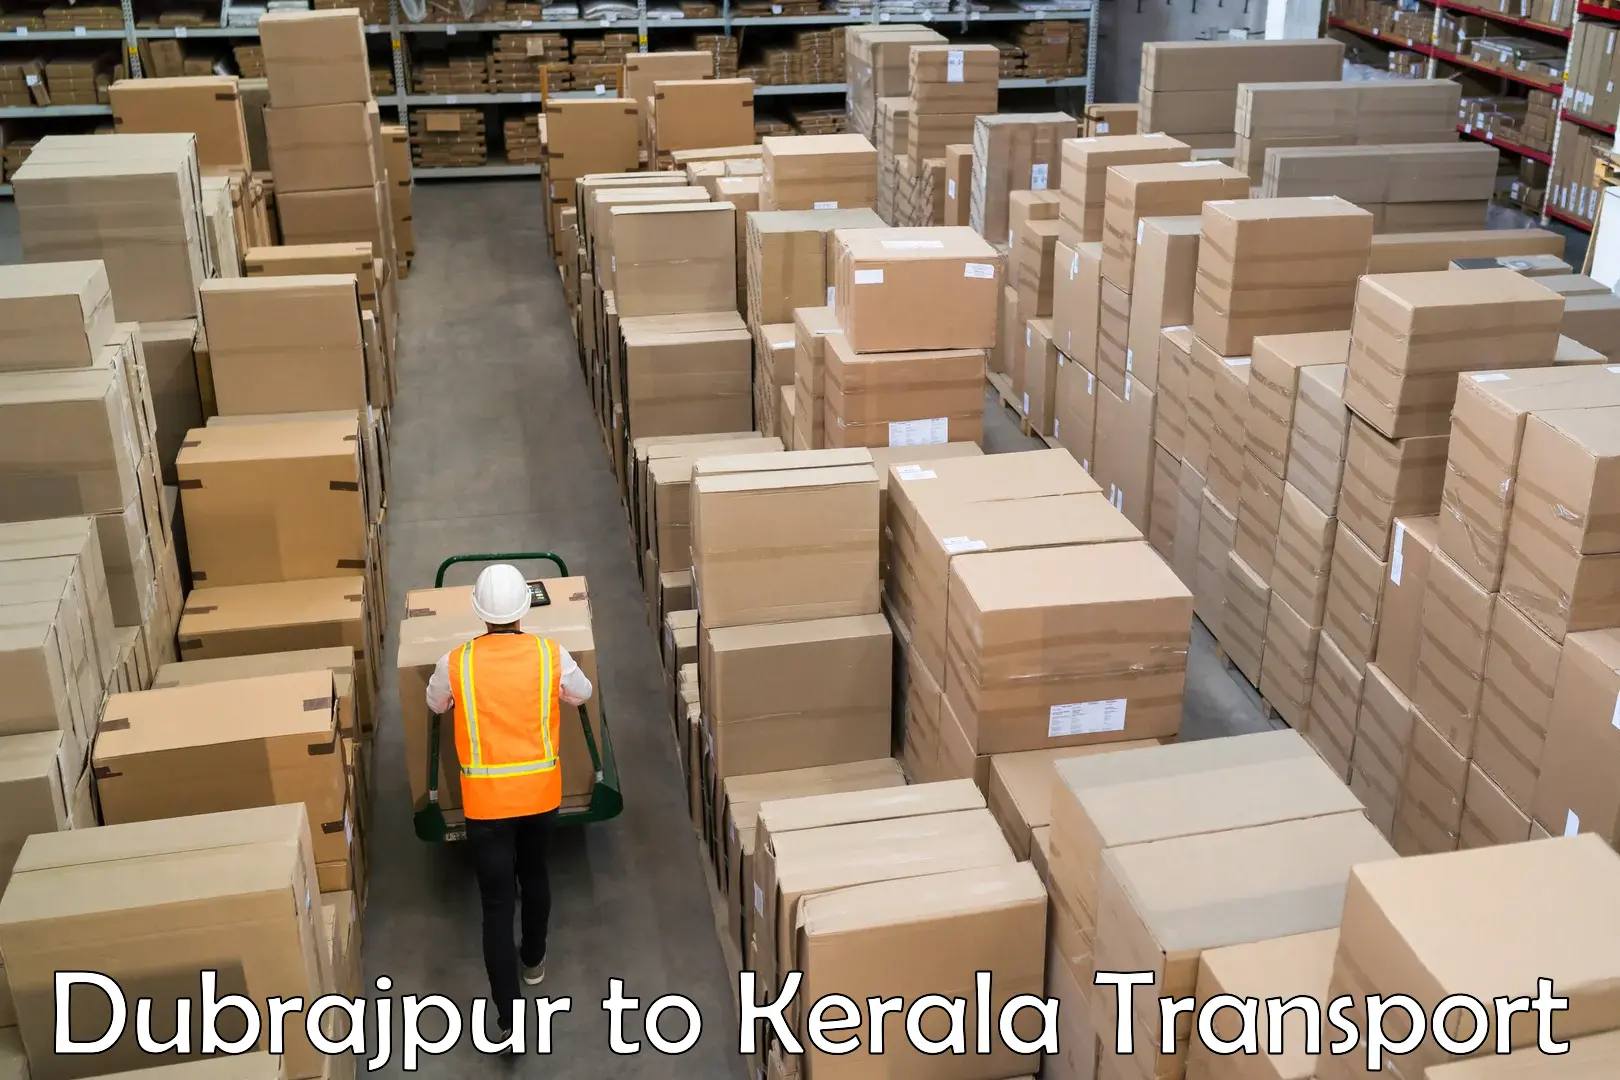 All India transport service Dubrajpur to Cochin Port Kochi